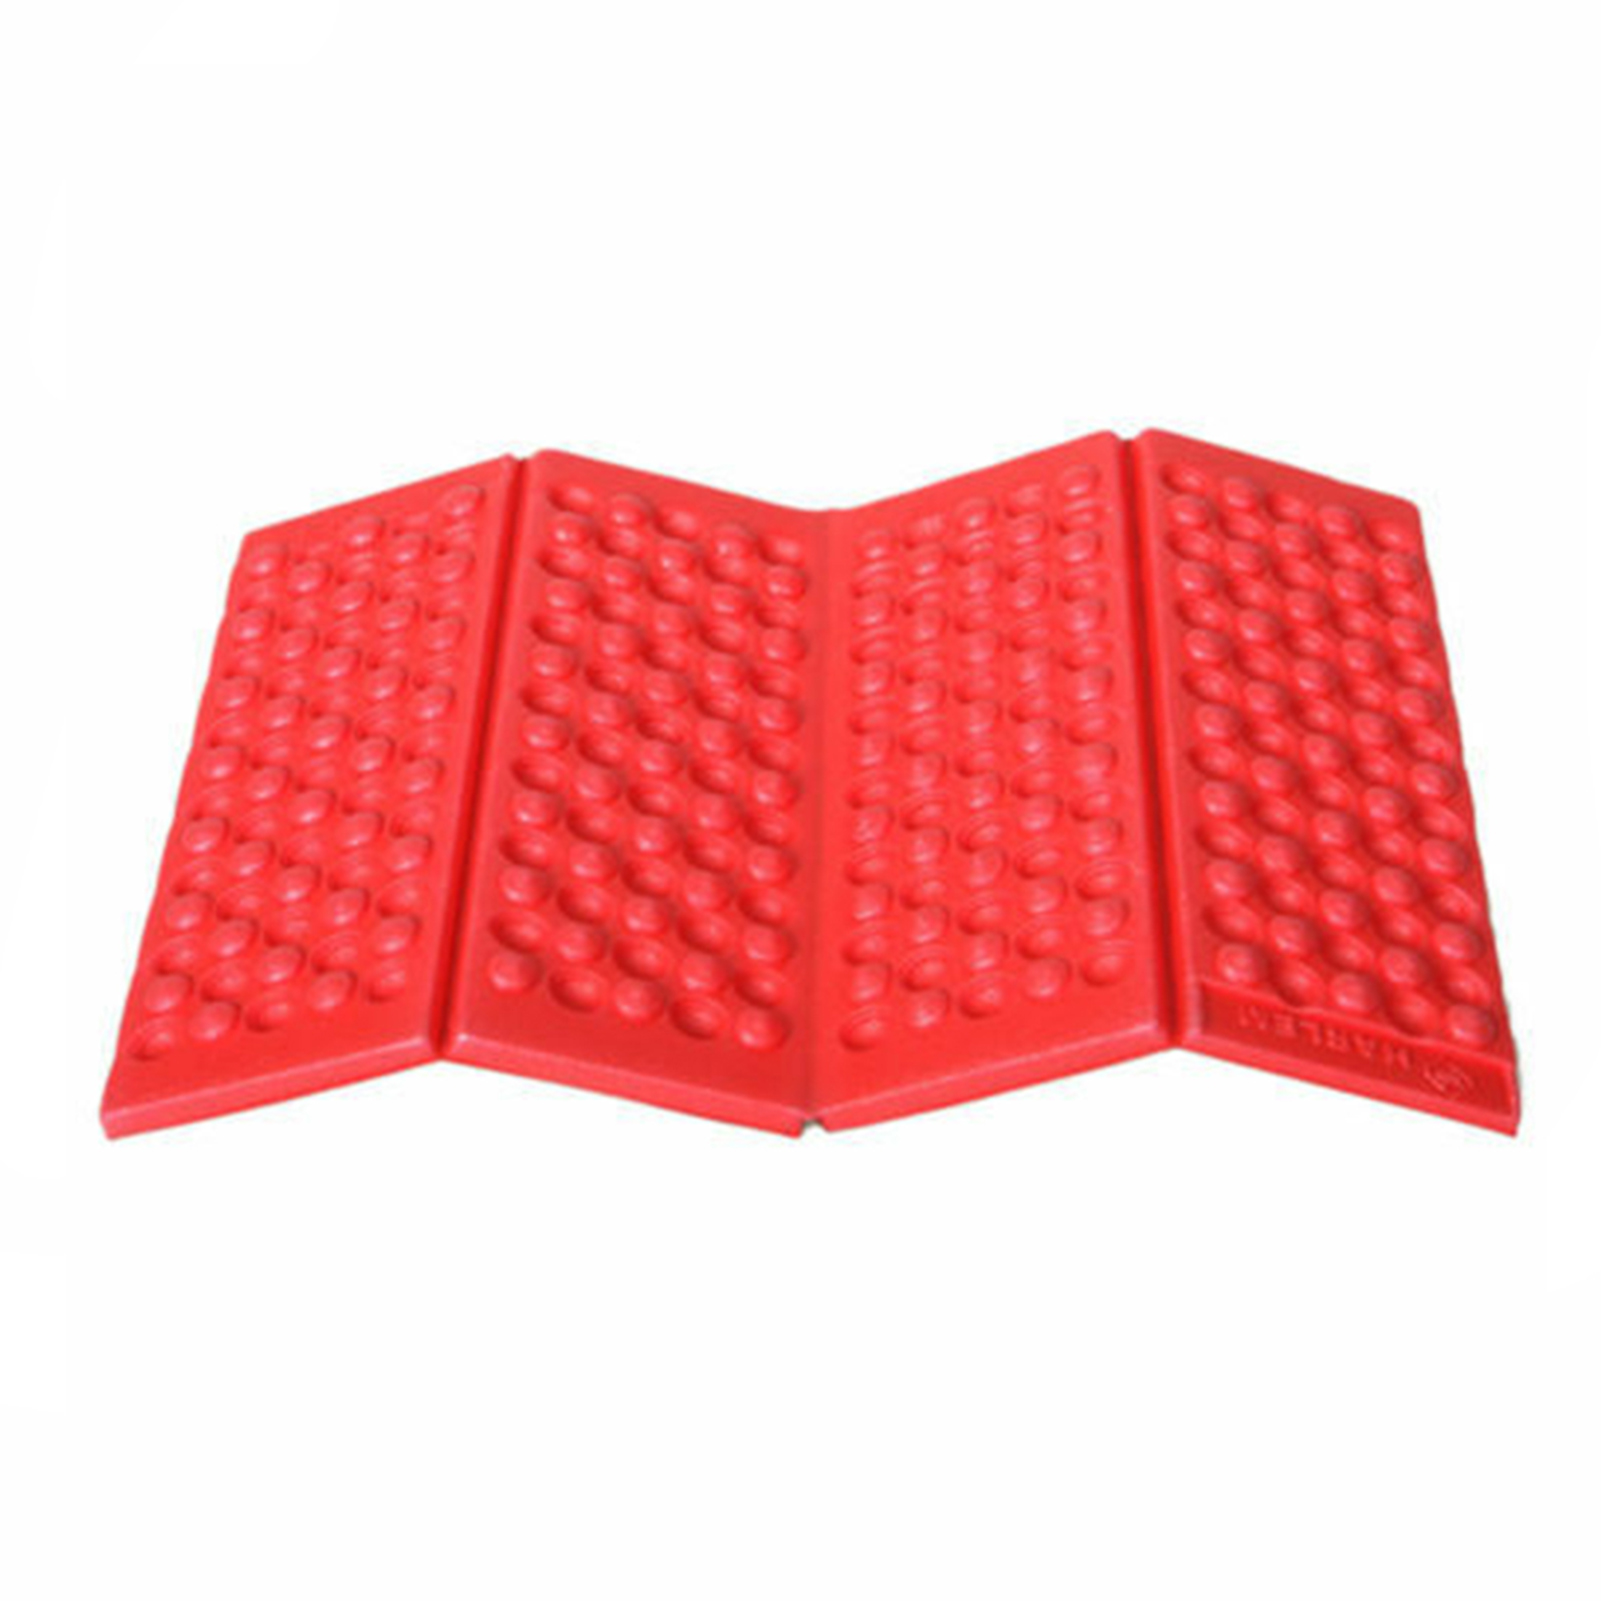 SPRING PARK Portable Lightweight Waterproof Folding Mat, Foldable Foam Sitting Pad for Outdoor Activities, Kneeling and Seat Cushion Chair Picnic Mat - image 2 of 6